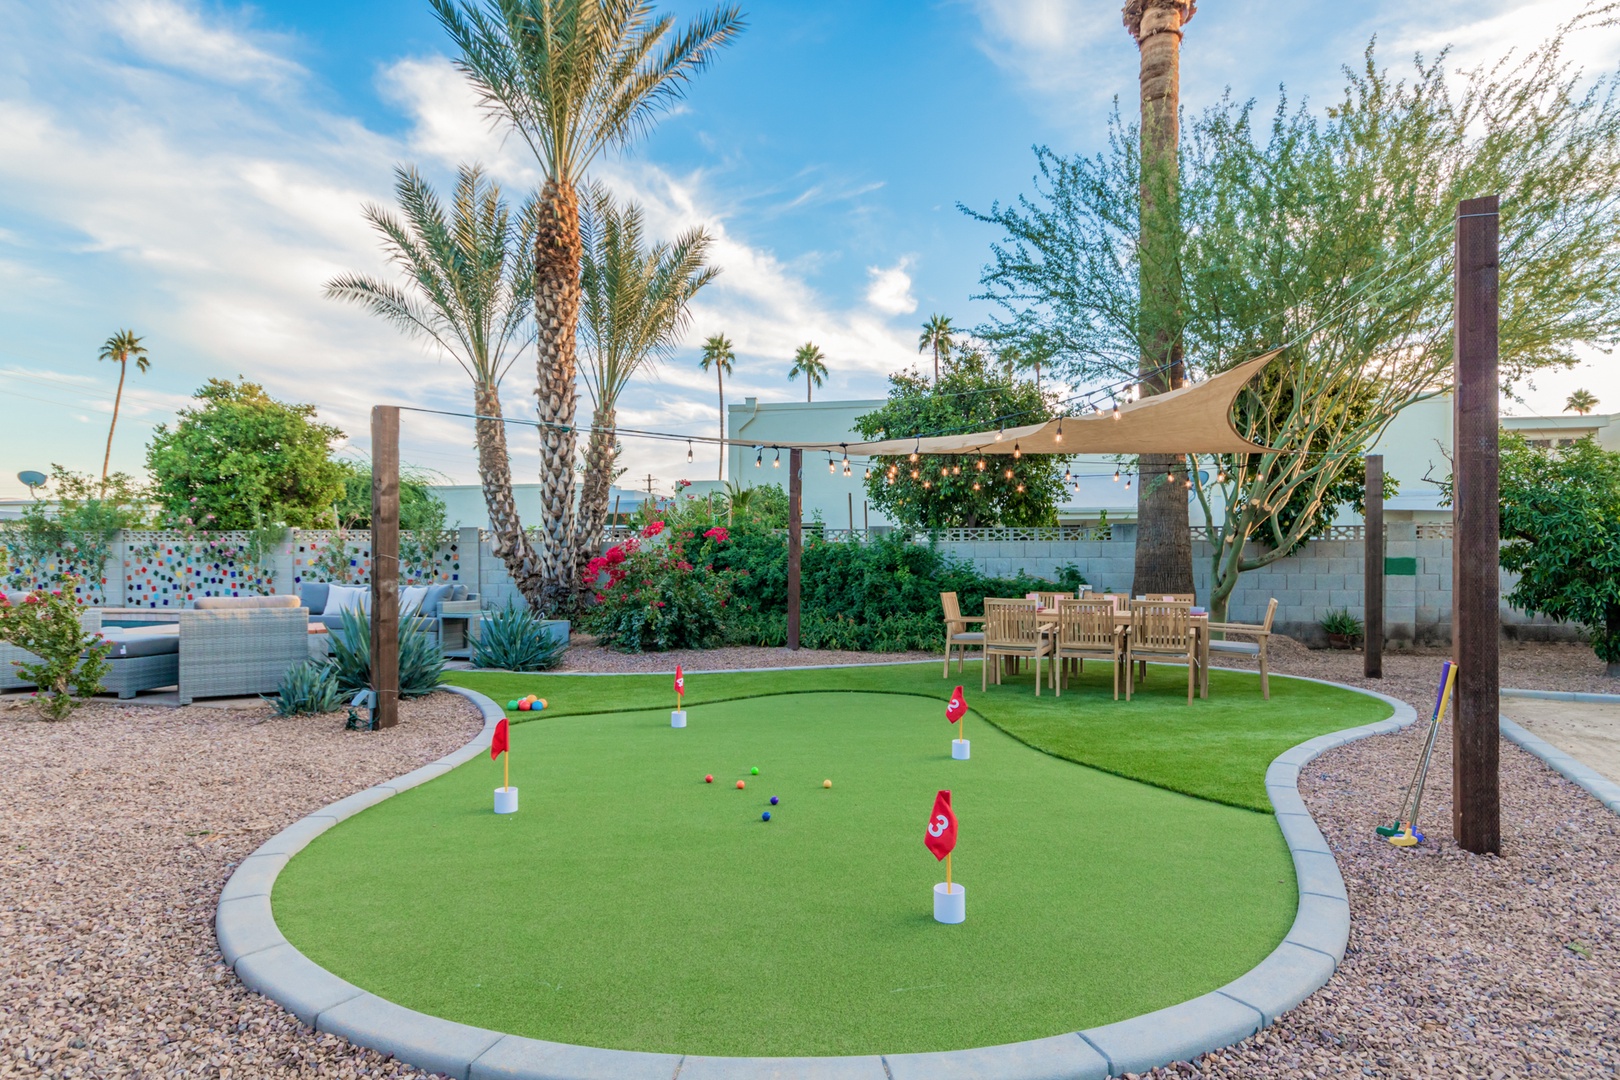 Putting Green and yard games